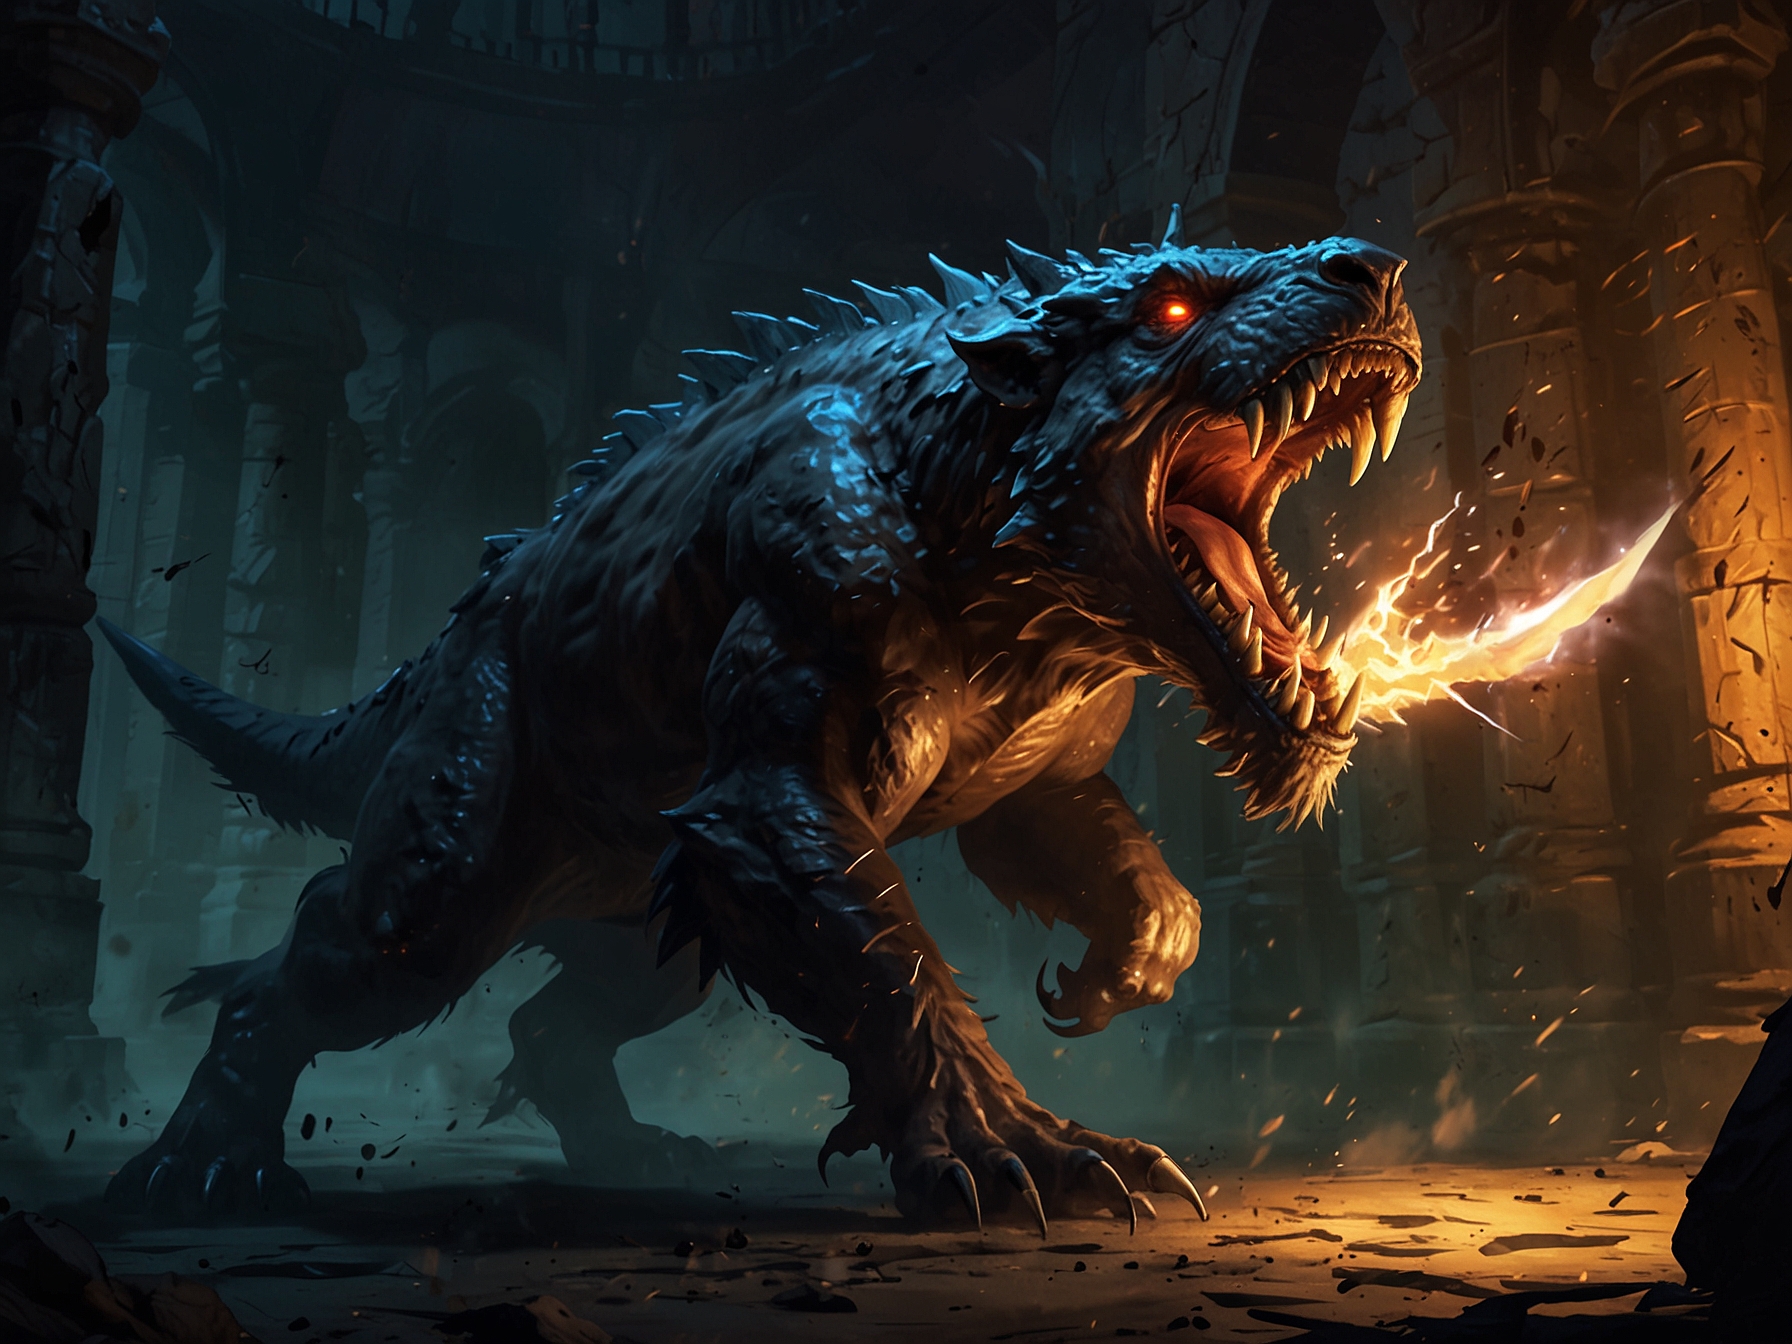 The intense battle with the Beastmaster mini-boss inside the Shadowed Crypts, featuring swift attacks and agile maneuvers as the player character wields the powerful Beast Claw weapon.